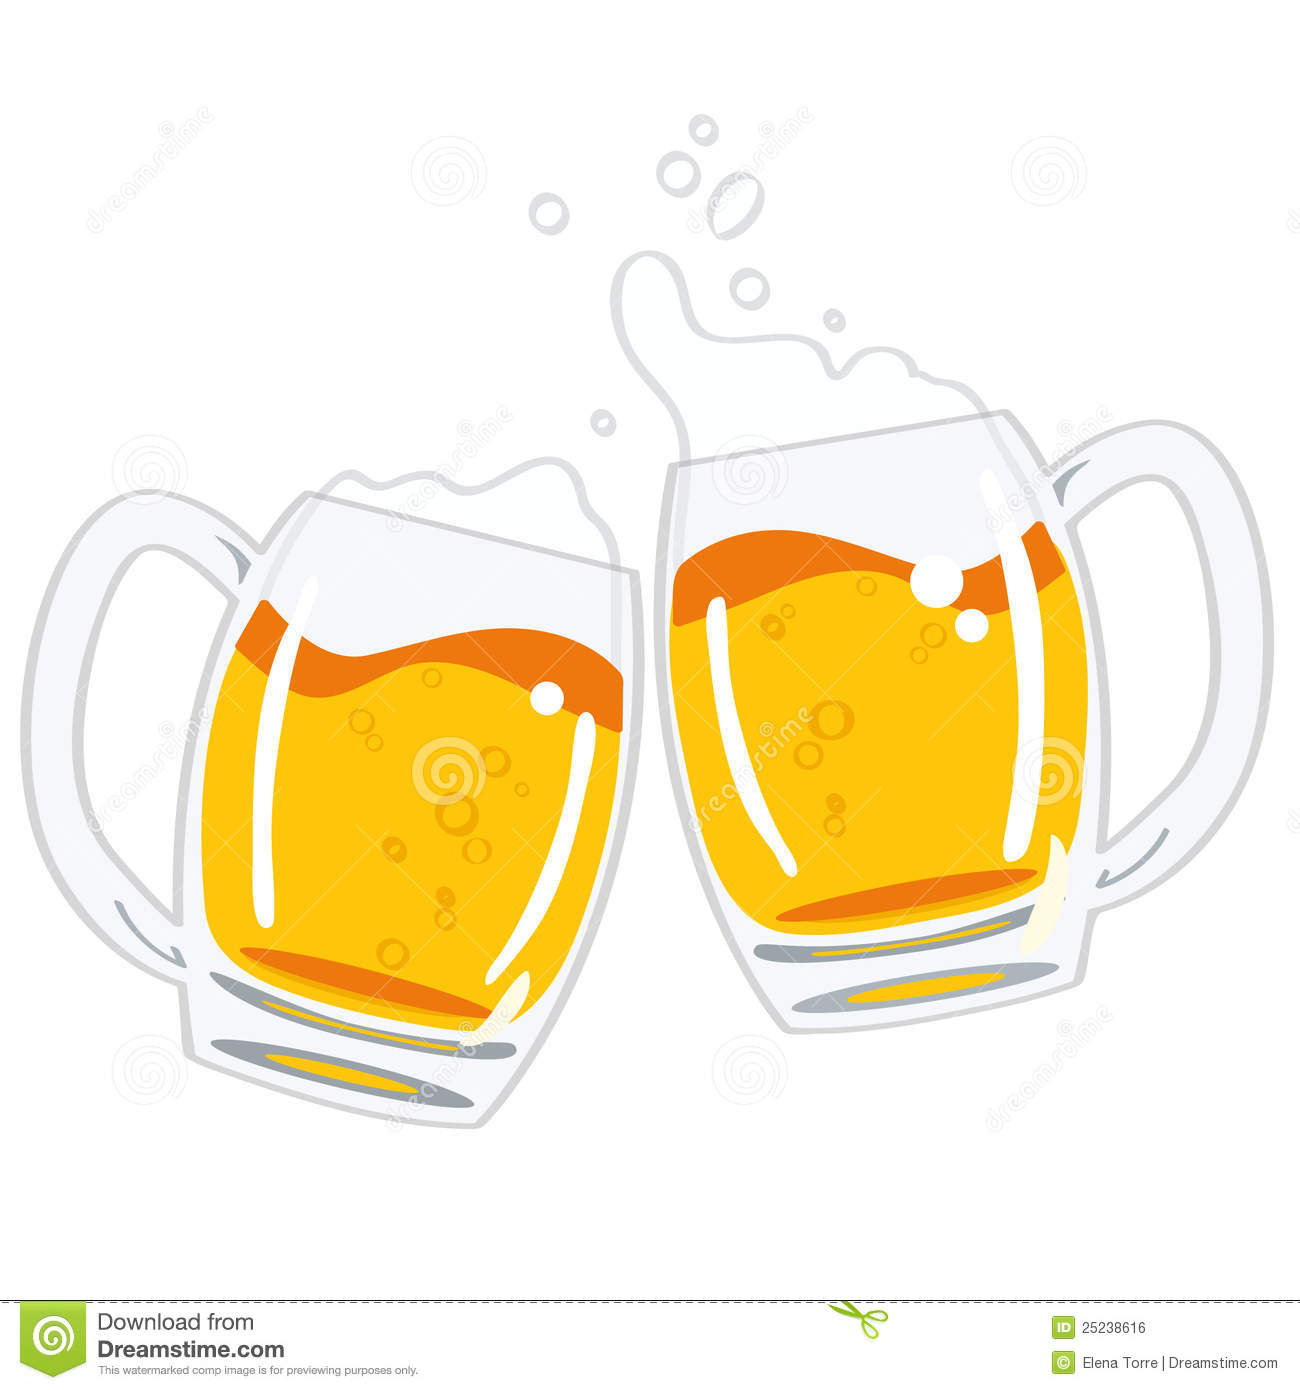 Two Glasses Of Beer Vector Royalty Free Stock Image   Image  25238616